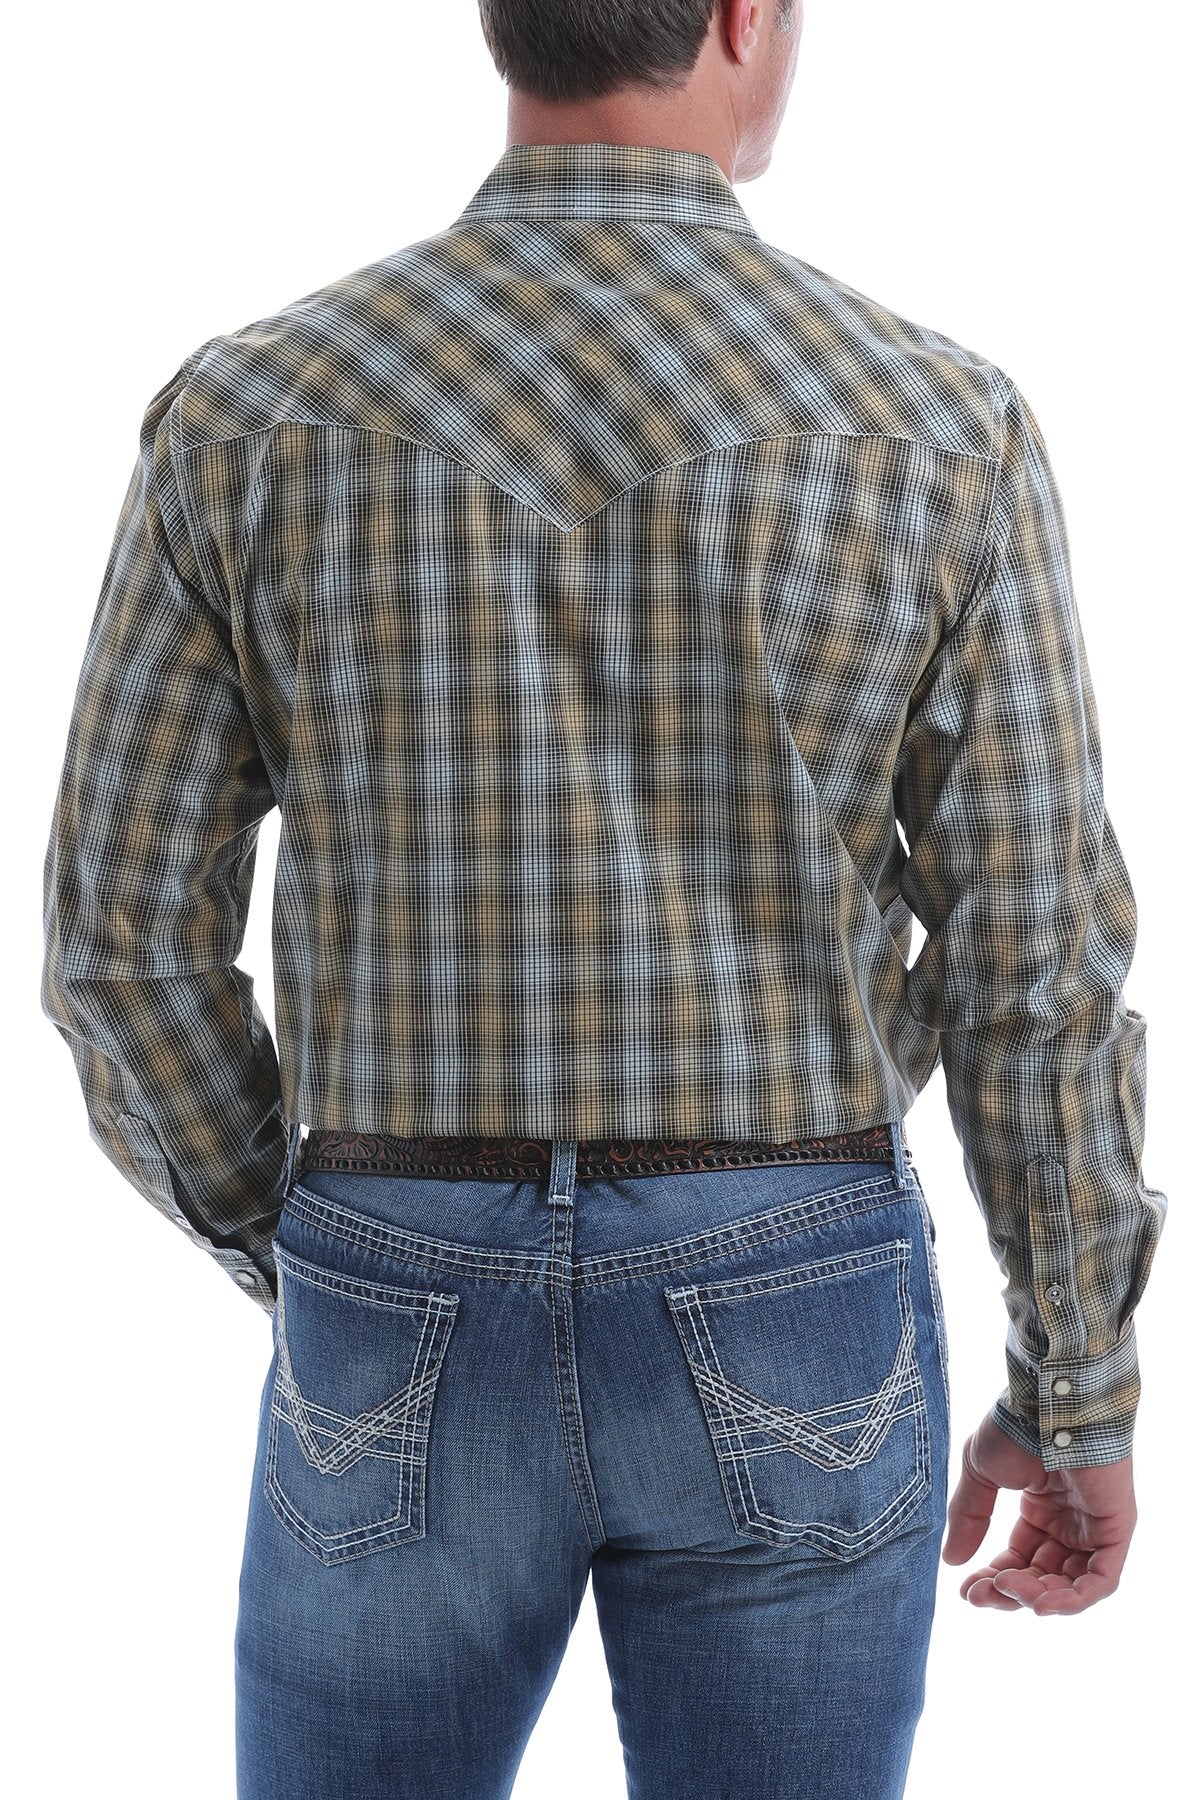 Men's Modern Fit Tan, Blue and Charcoal Plaid Western Snap Shirt